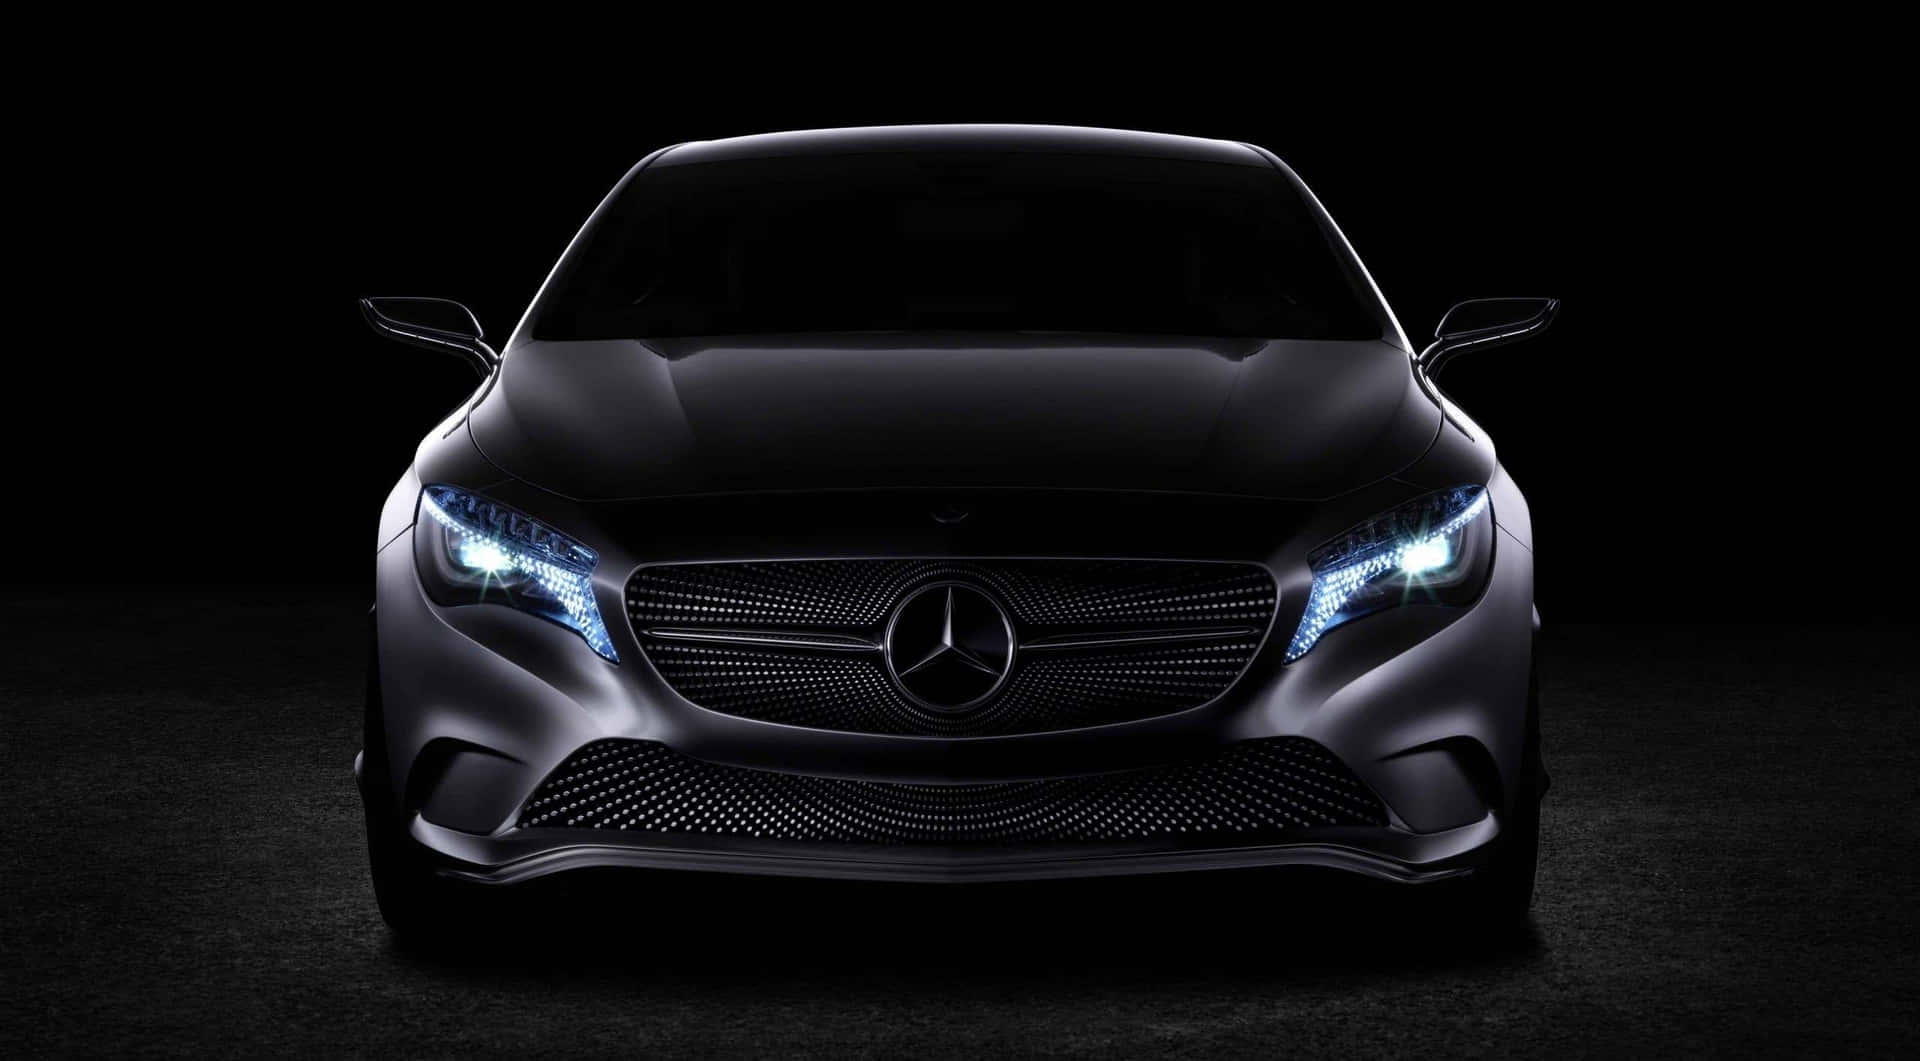 "In Excellence We Drive - The Mercedes Black" Wallpaper